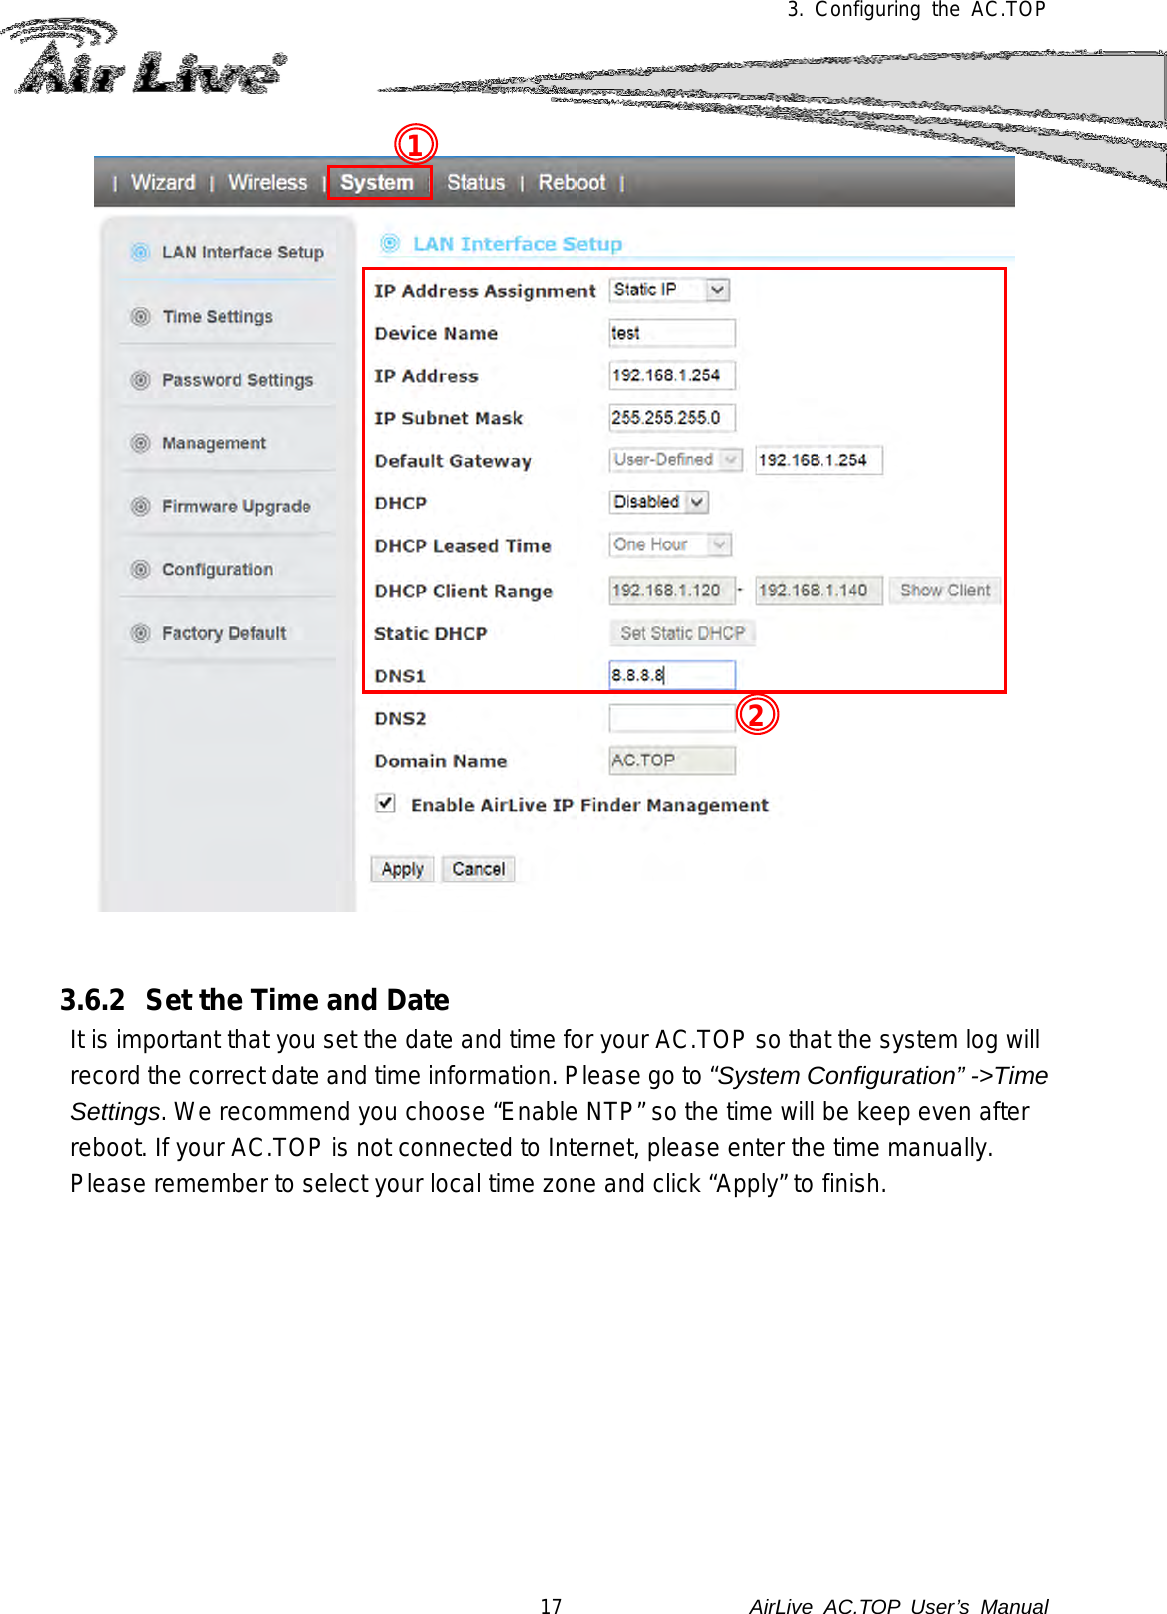 3.  Configuring the AC.TOP      3.6.2 Set the Time and Date   It is important that you set the date and time for your AC.TOP so that the system log will record the correct date and time information. Please go to “System Configuration” -&gt;Time Settings. We recommend you choose “Enable NTP” so the time will be keep even after reboot. If your AC.TOP is not connected to Internet, please enter the time manually.   Please remember to select your local time zone and click “Apply” to finish.  2 1 17               AirLive  AC.TOP User’s Manual 